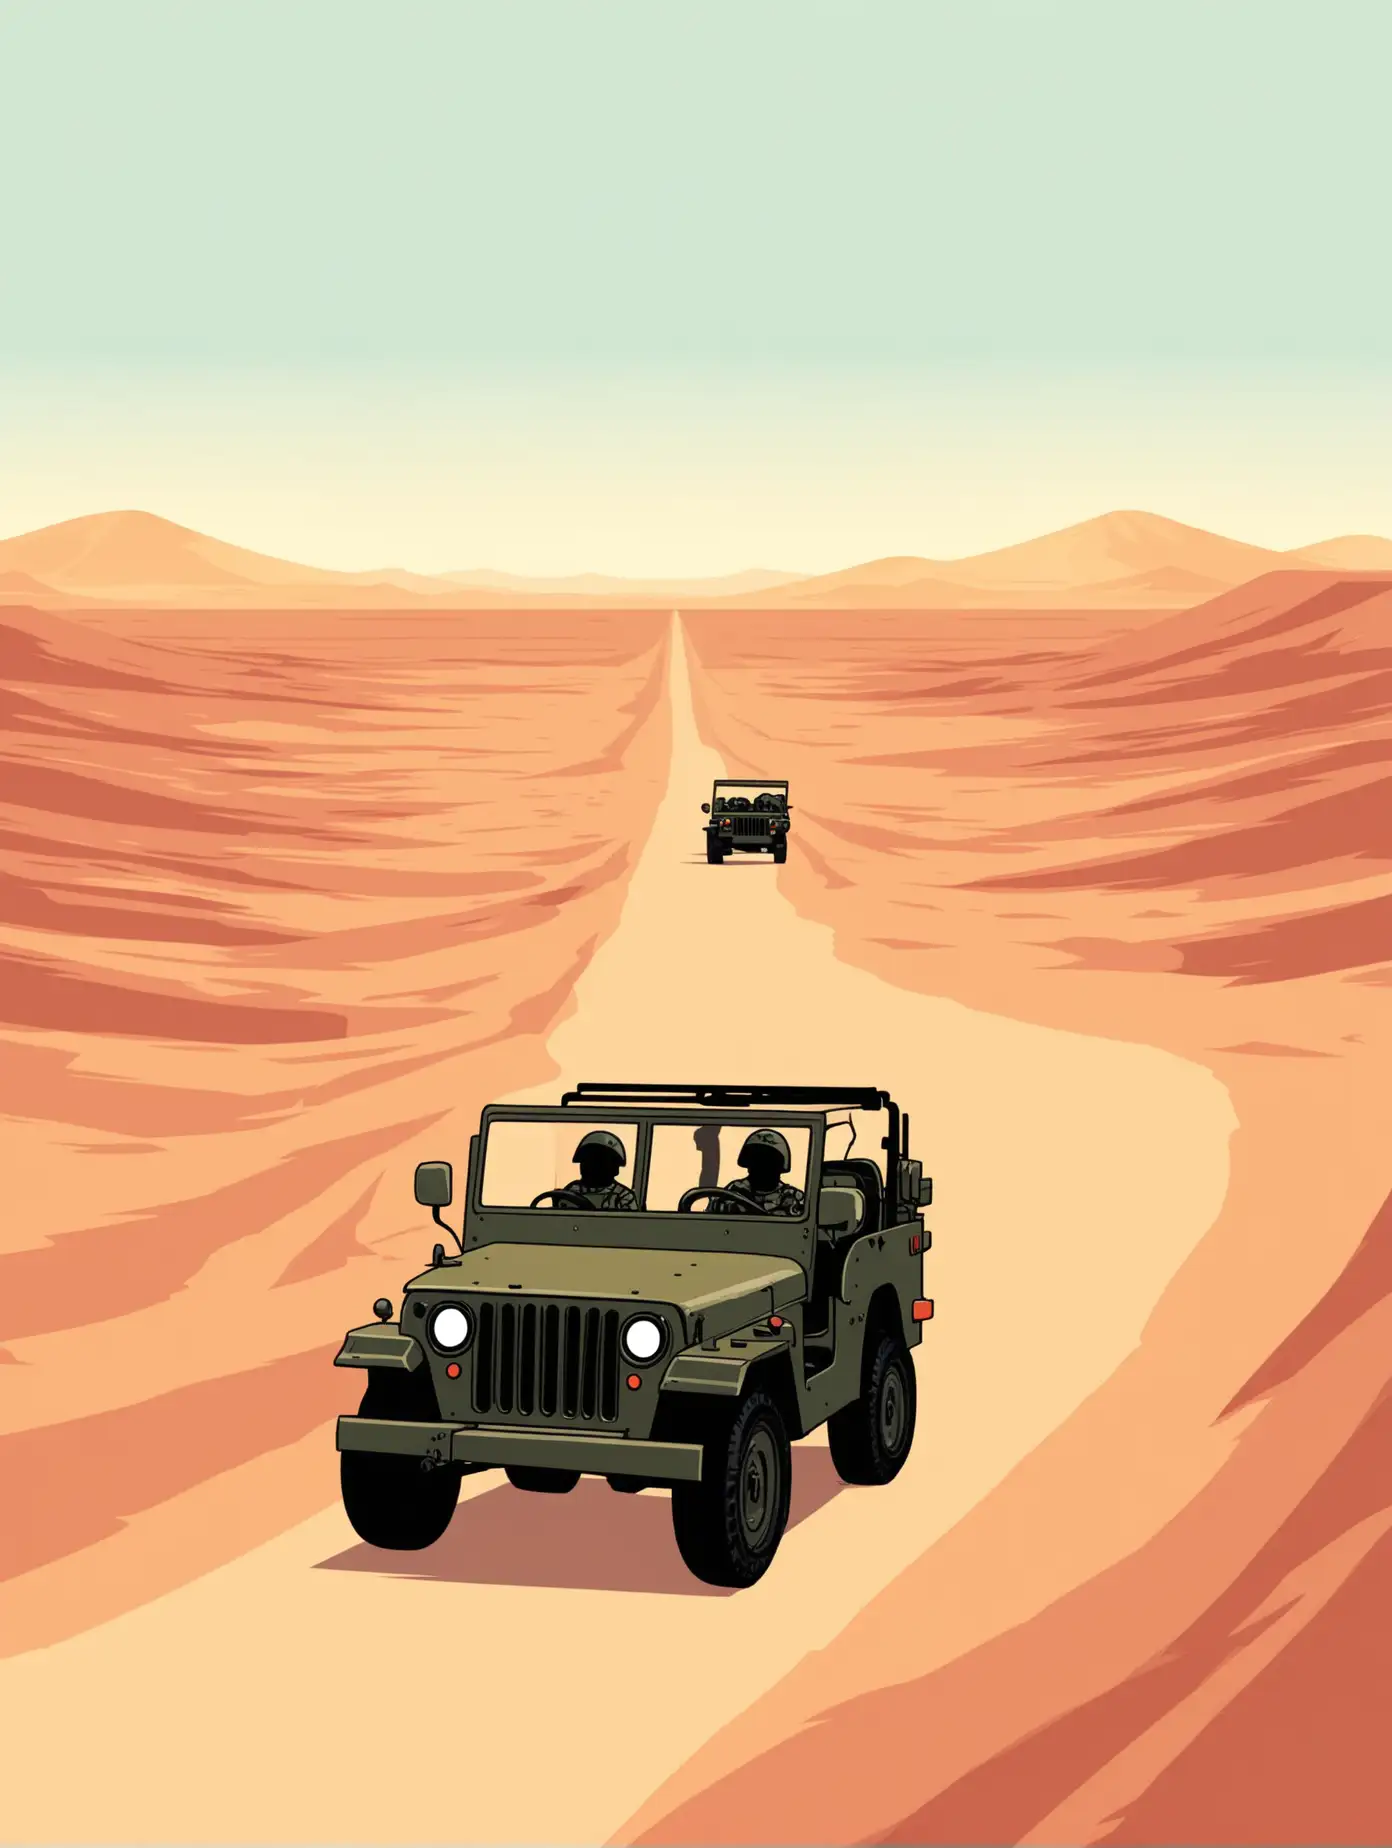 Minimalistic Vector Illustration of Small Military Jeep Driving in 4Color Desert